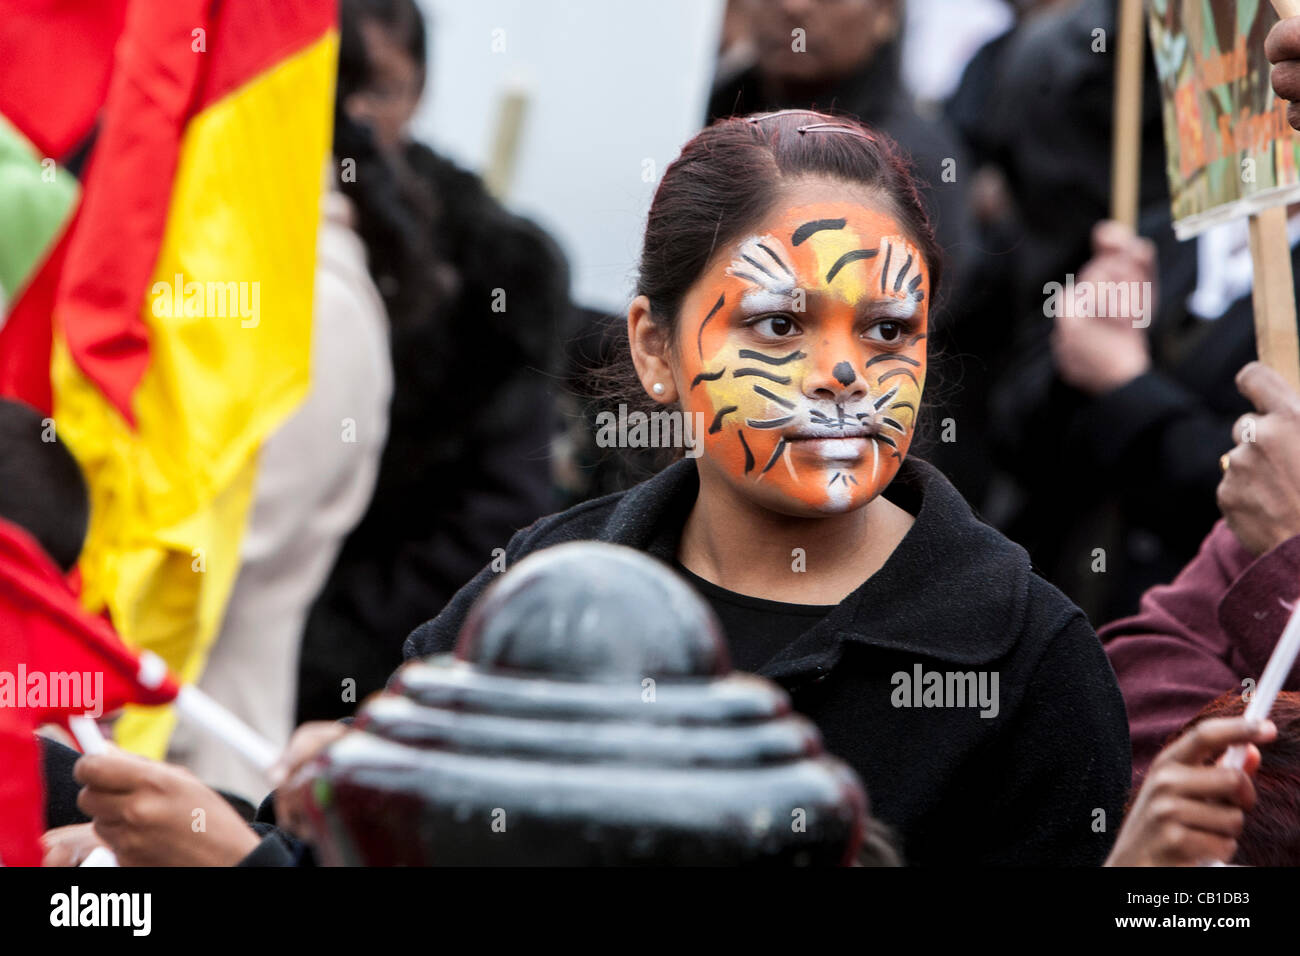 London, United Kingdom, 19/05/2012. Young Tamil girl with tiger face paint attending a rally where Tamils are demanding justice for the many people were killed in alleged war crimes during the civil war in 2009 Stock Photo